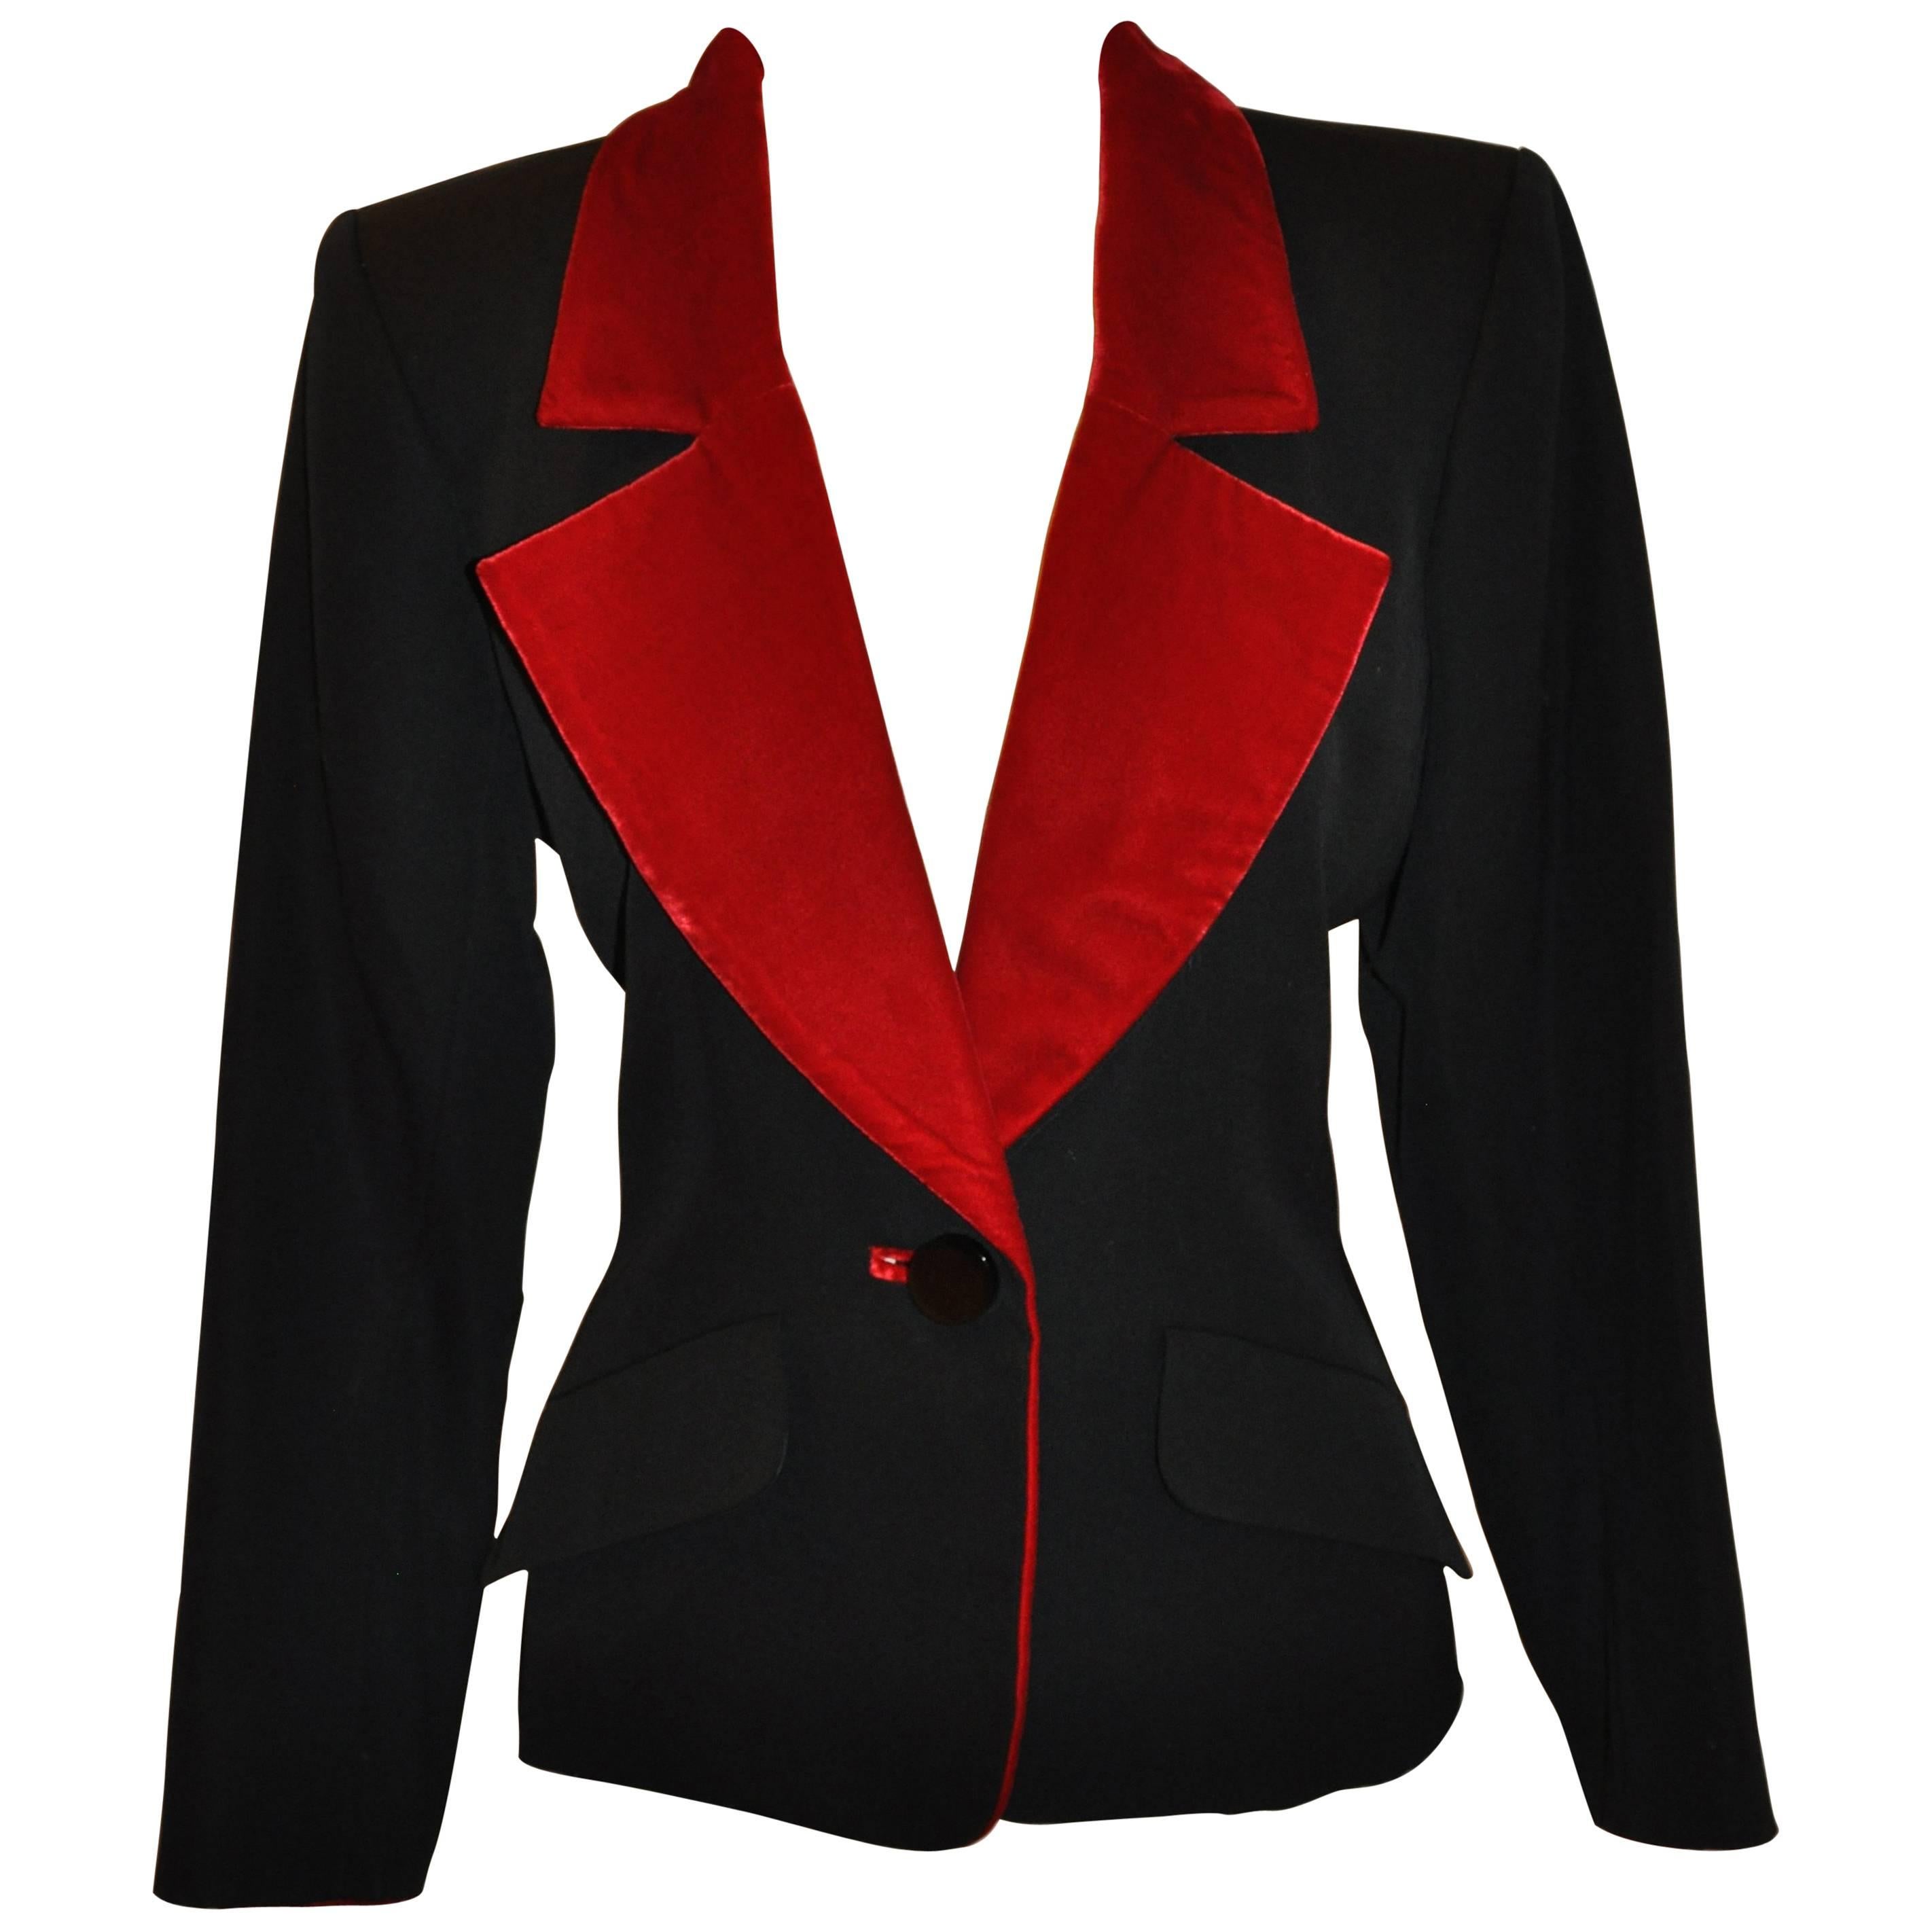 Yves Saint Laurent Signature Black Accented with Red Velvet "Smoking" Jacket